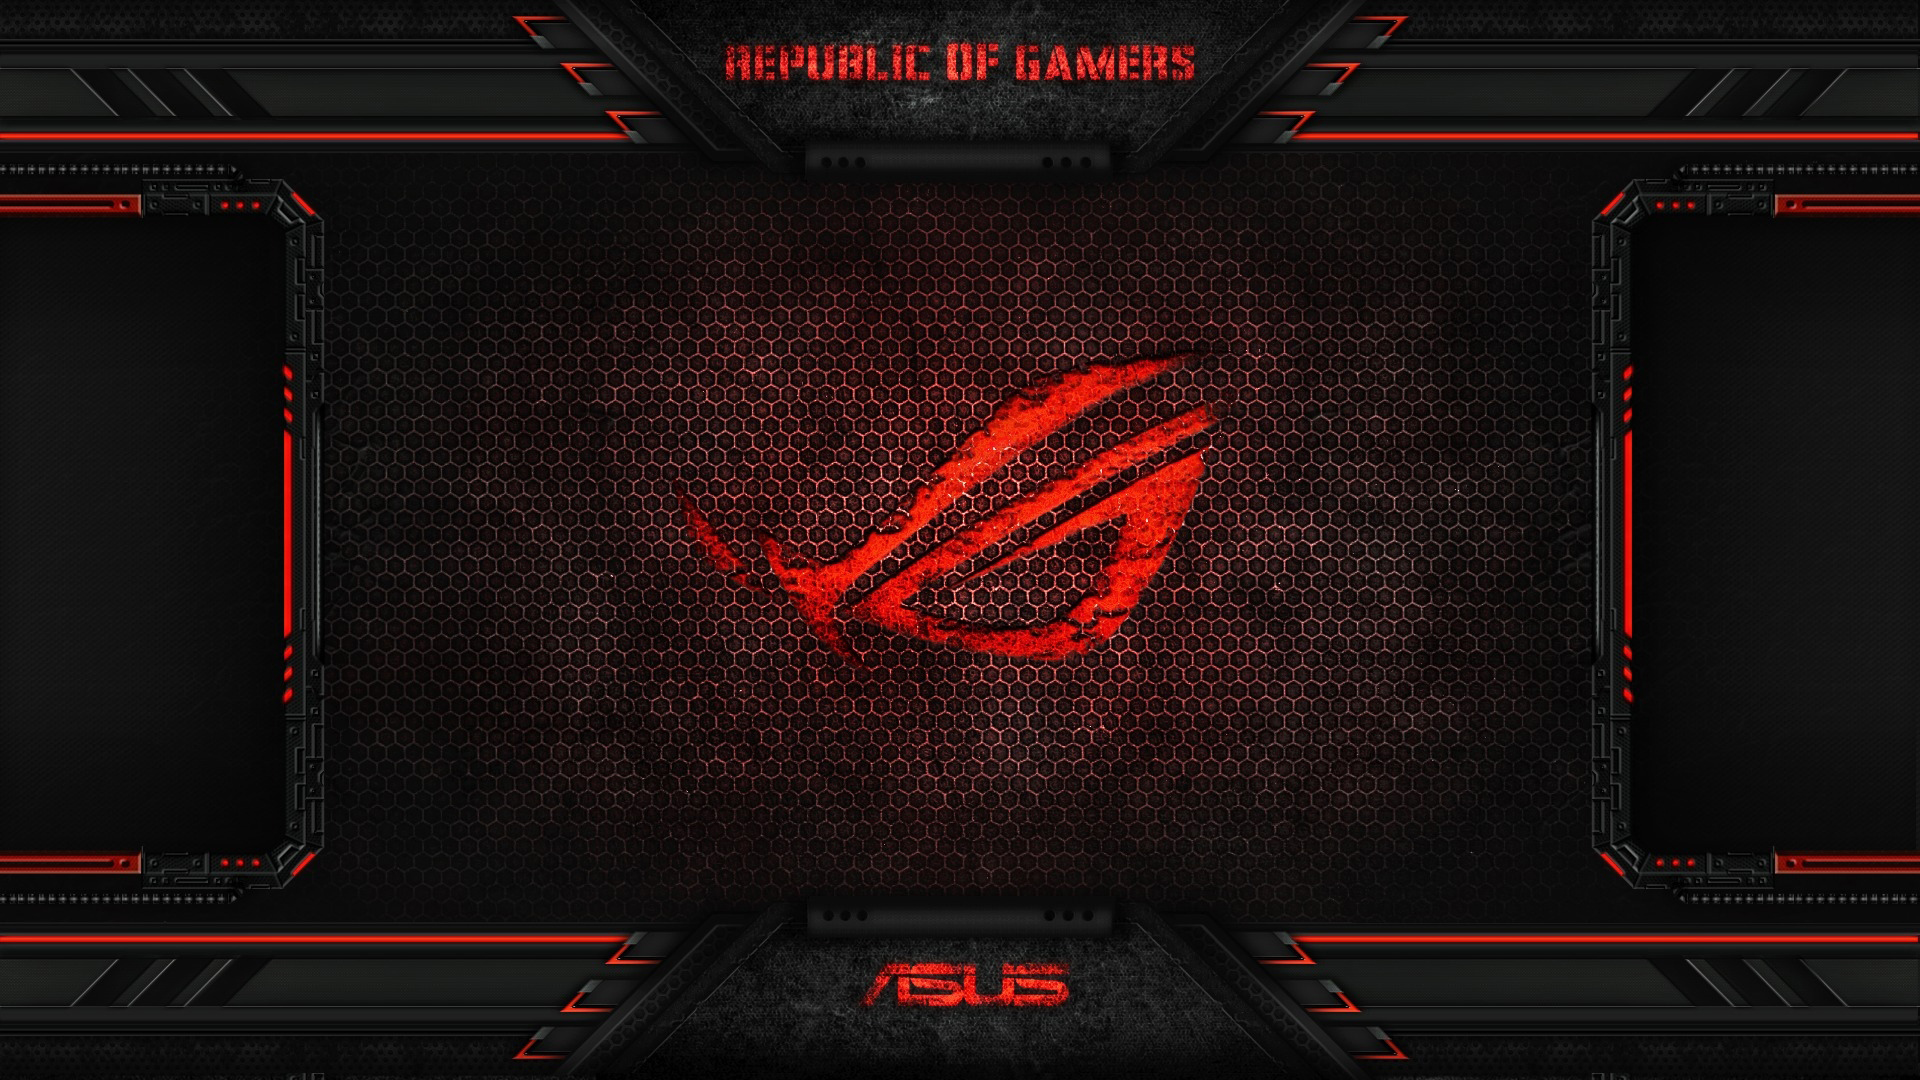 republic of gamers asus wallpapers55com   Best Wallpapers for PCs 1920x1080